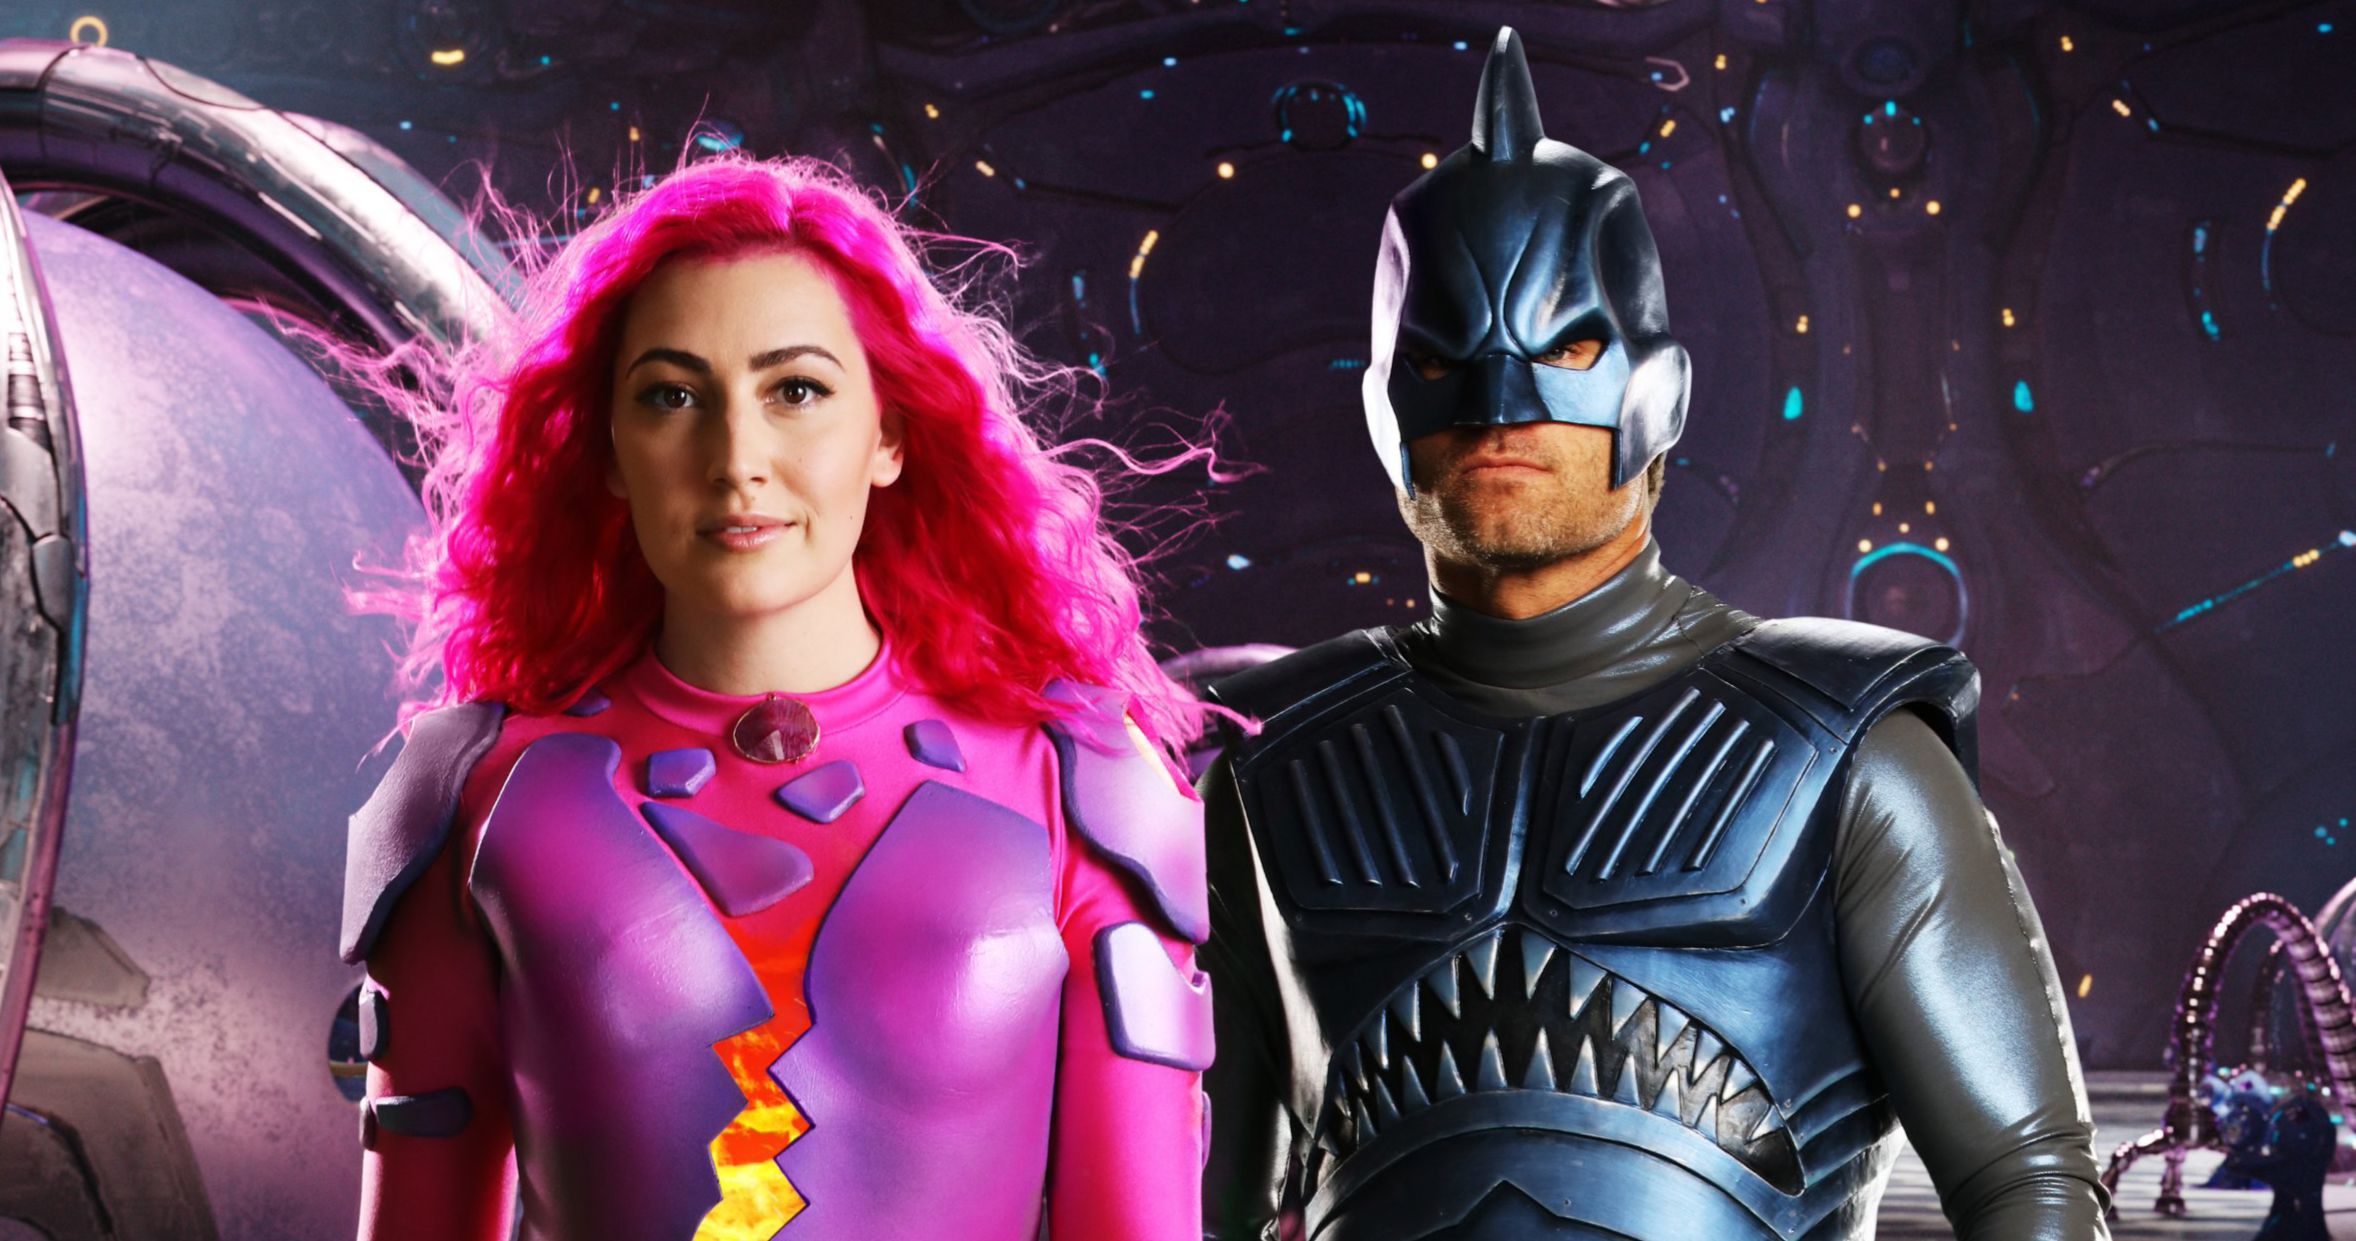 Sharkboy and Lavagirl Return in New Look at Netflix's We Can Be Heroes